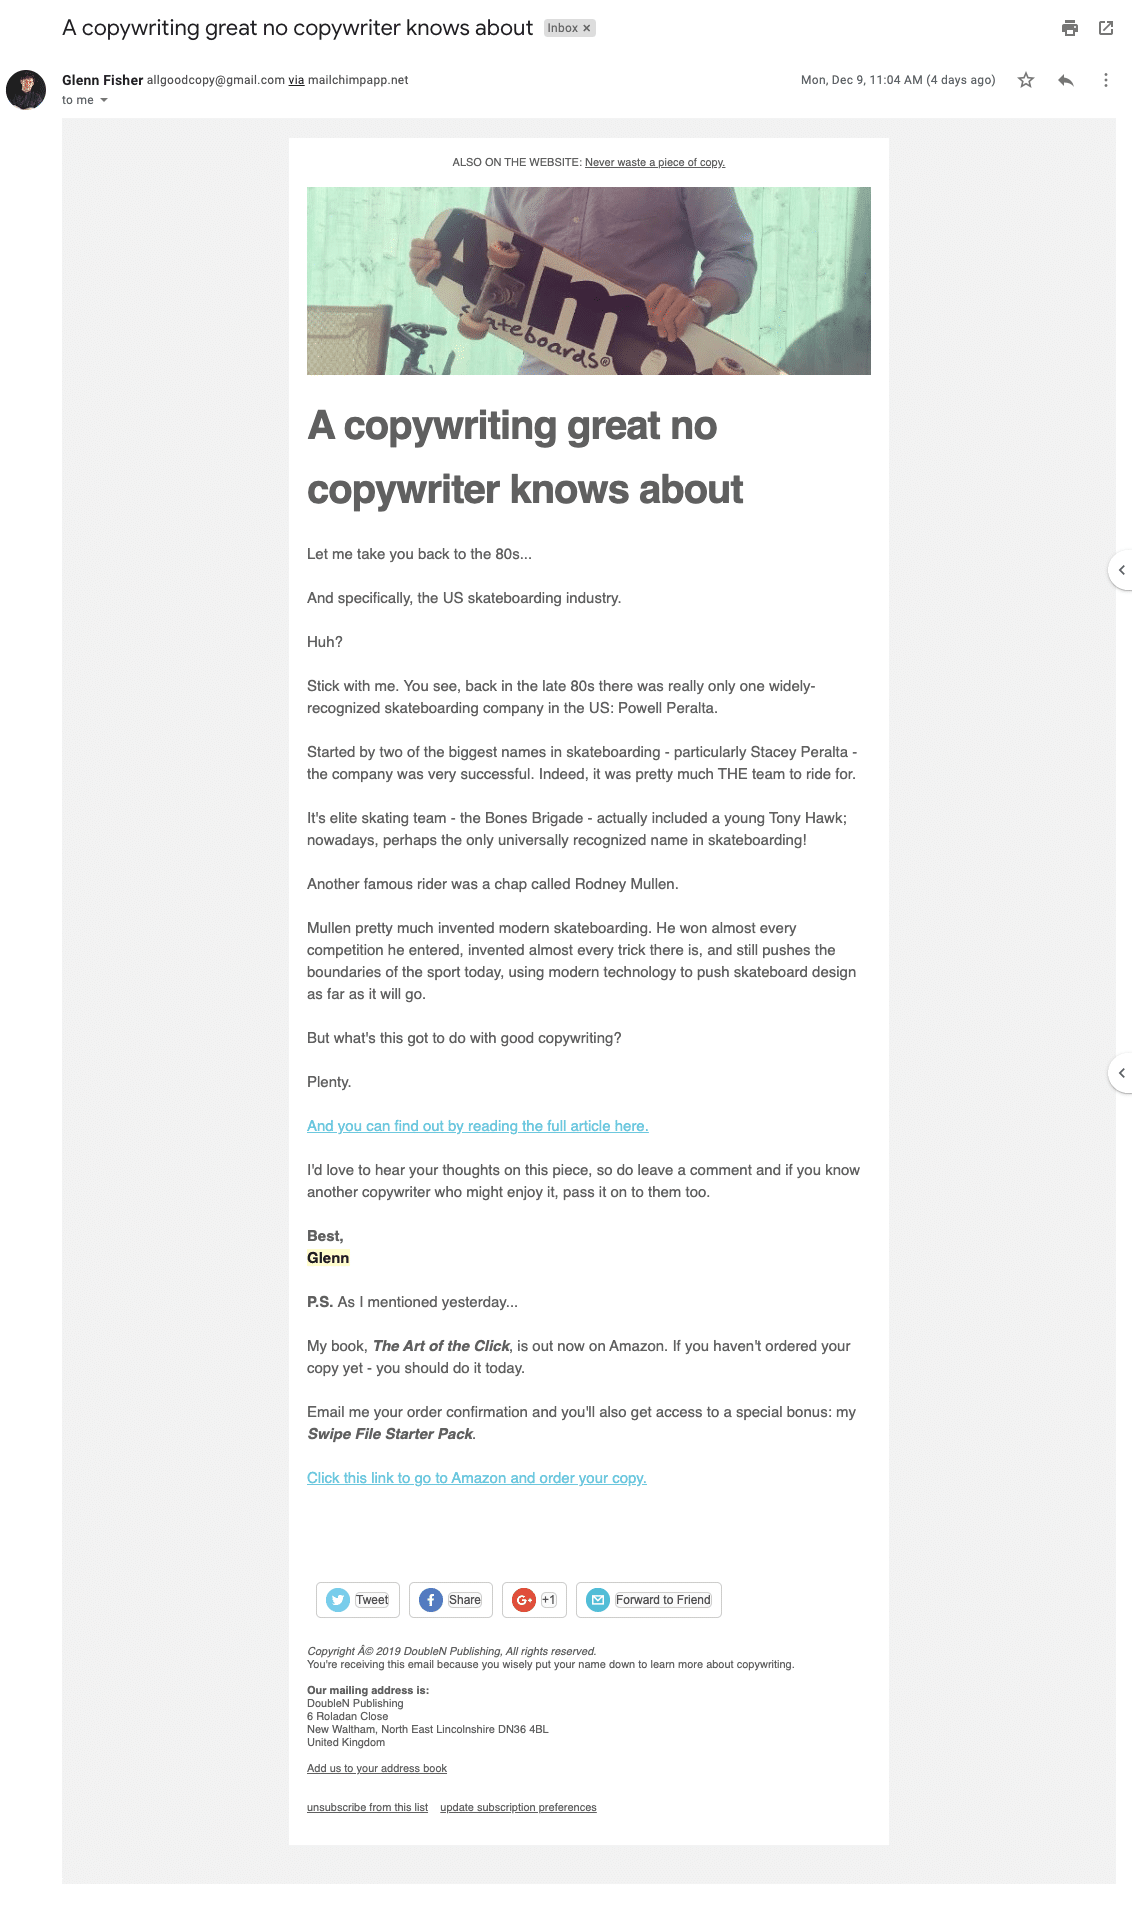 Glenn Fisher email with subject line, “A copywriting great no copywriter knows about”